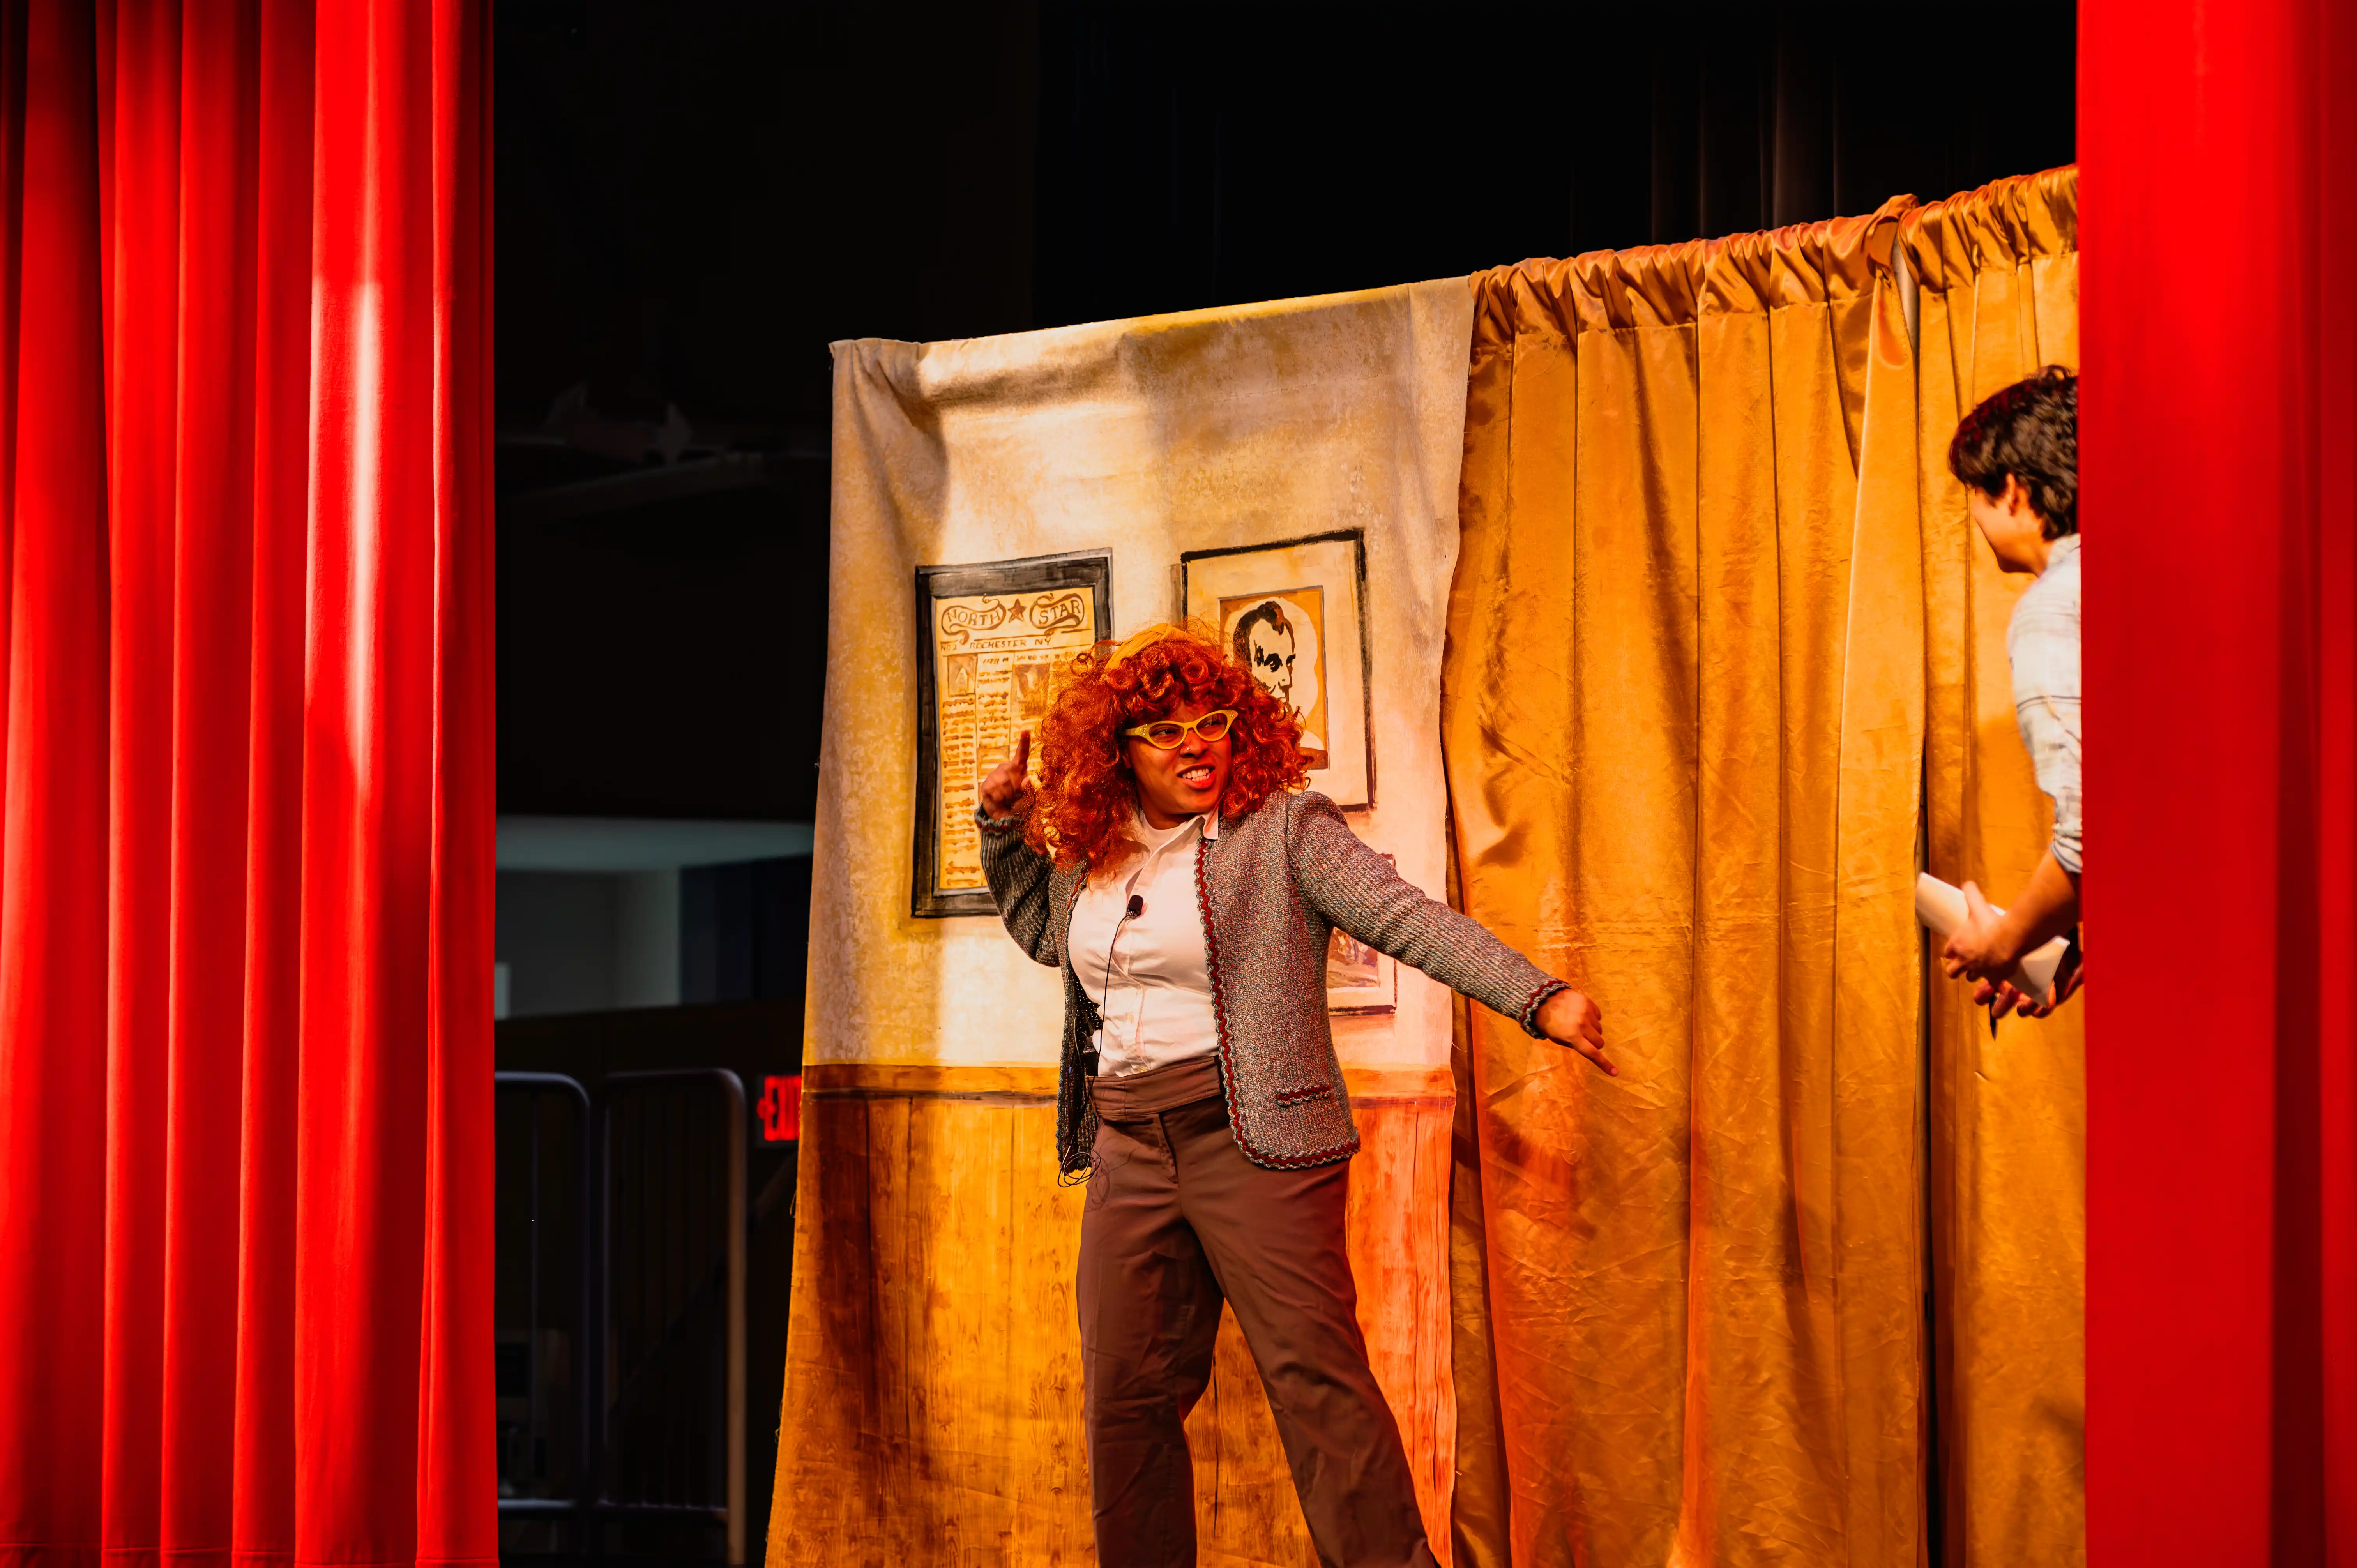 Performer with vibrant red hair in a theatrical pose on a stage with a curtain and painted backdrop.